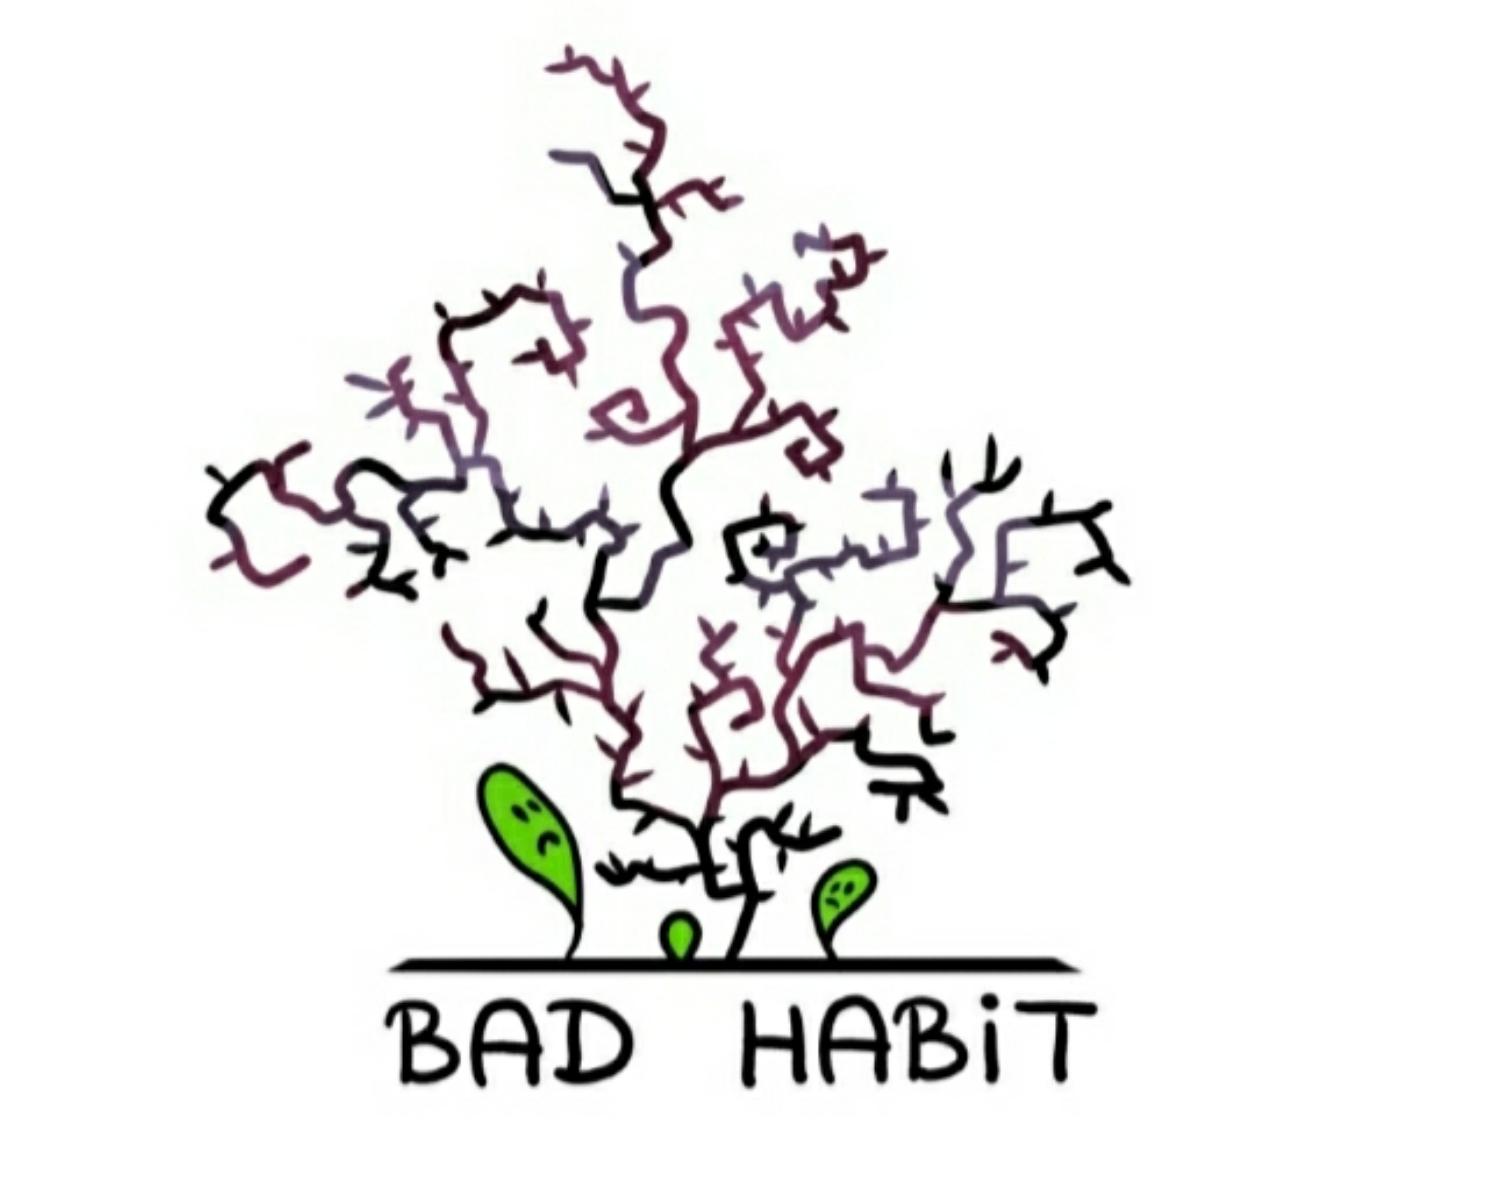 Habits can be positive, but they can also be negative.